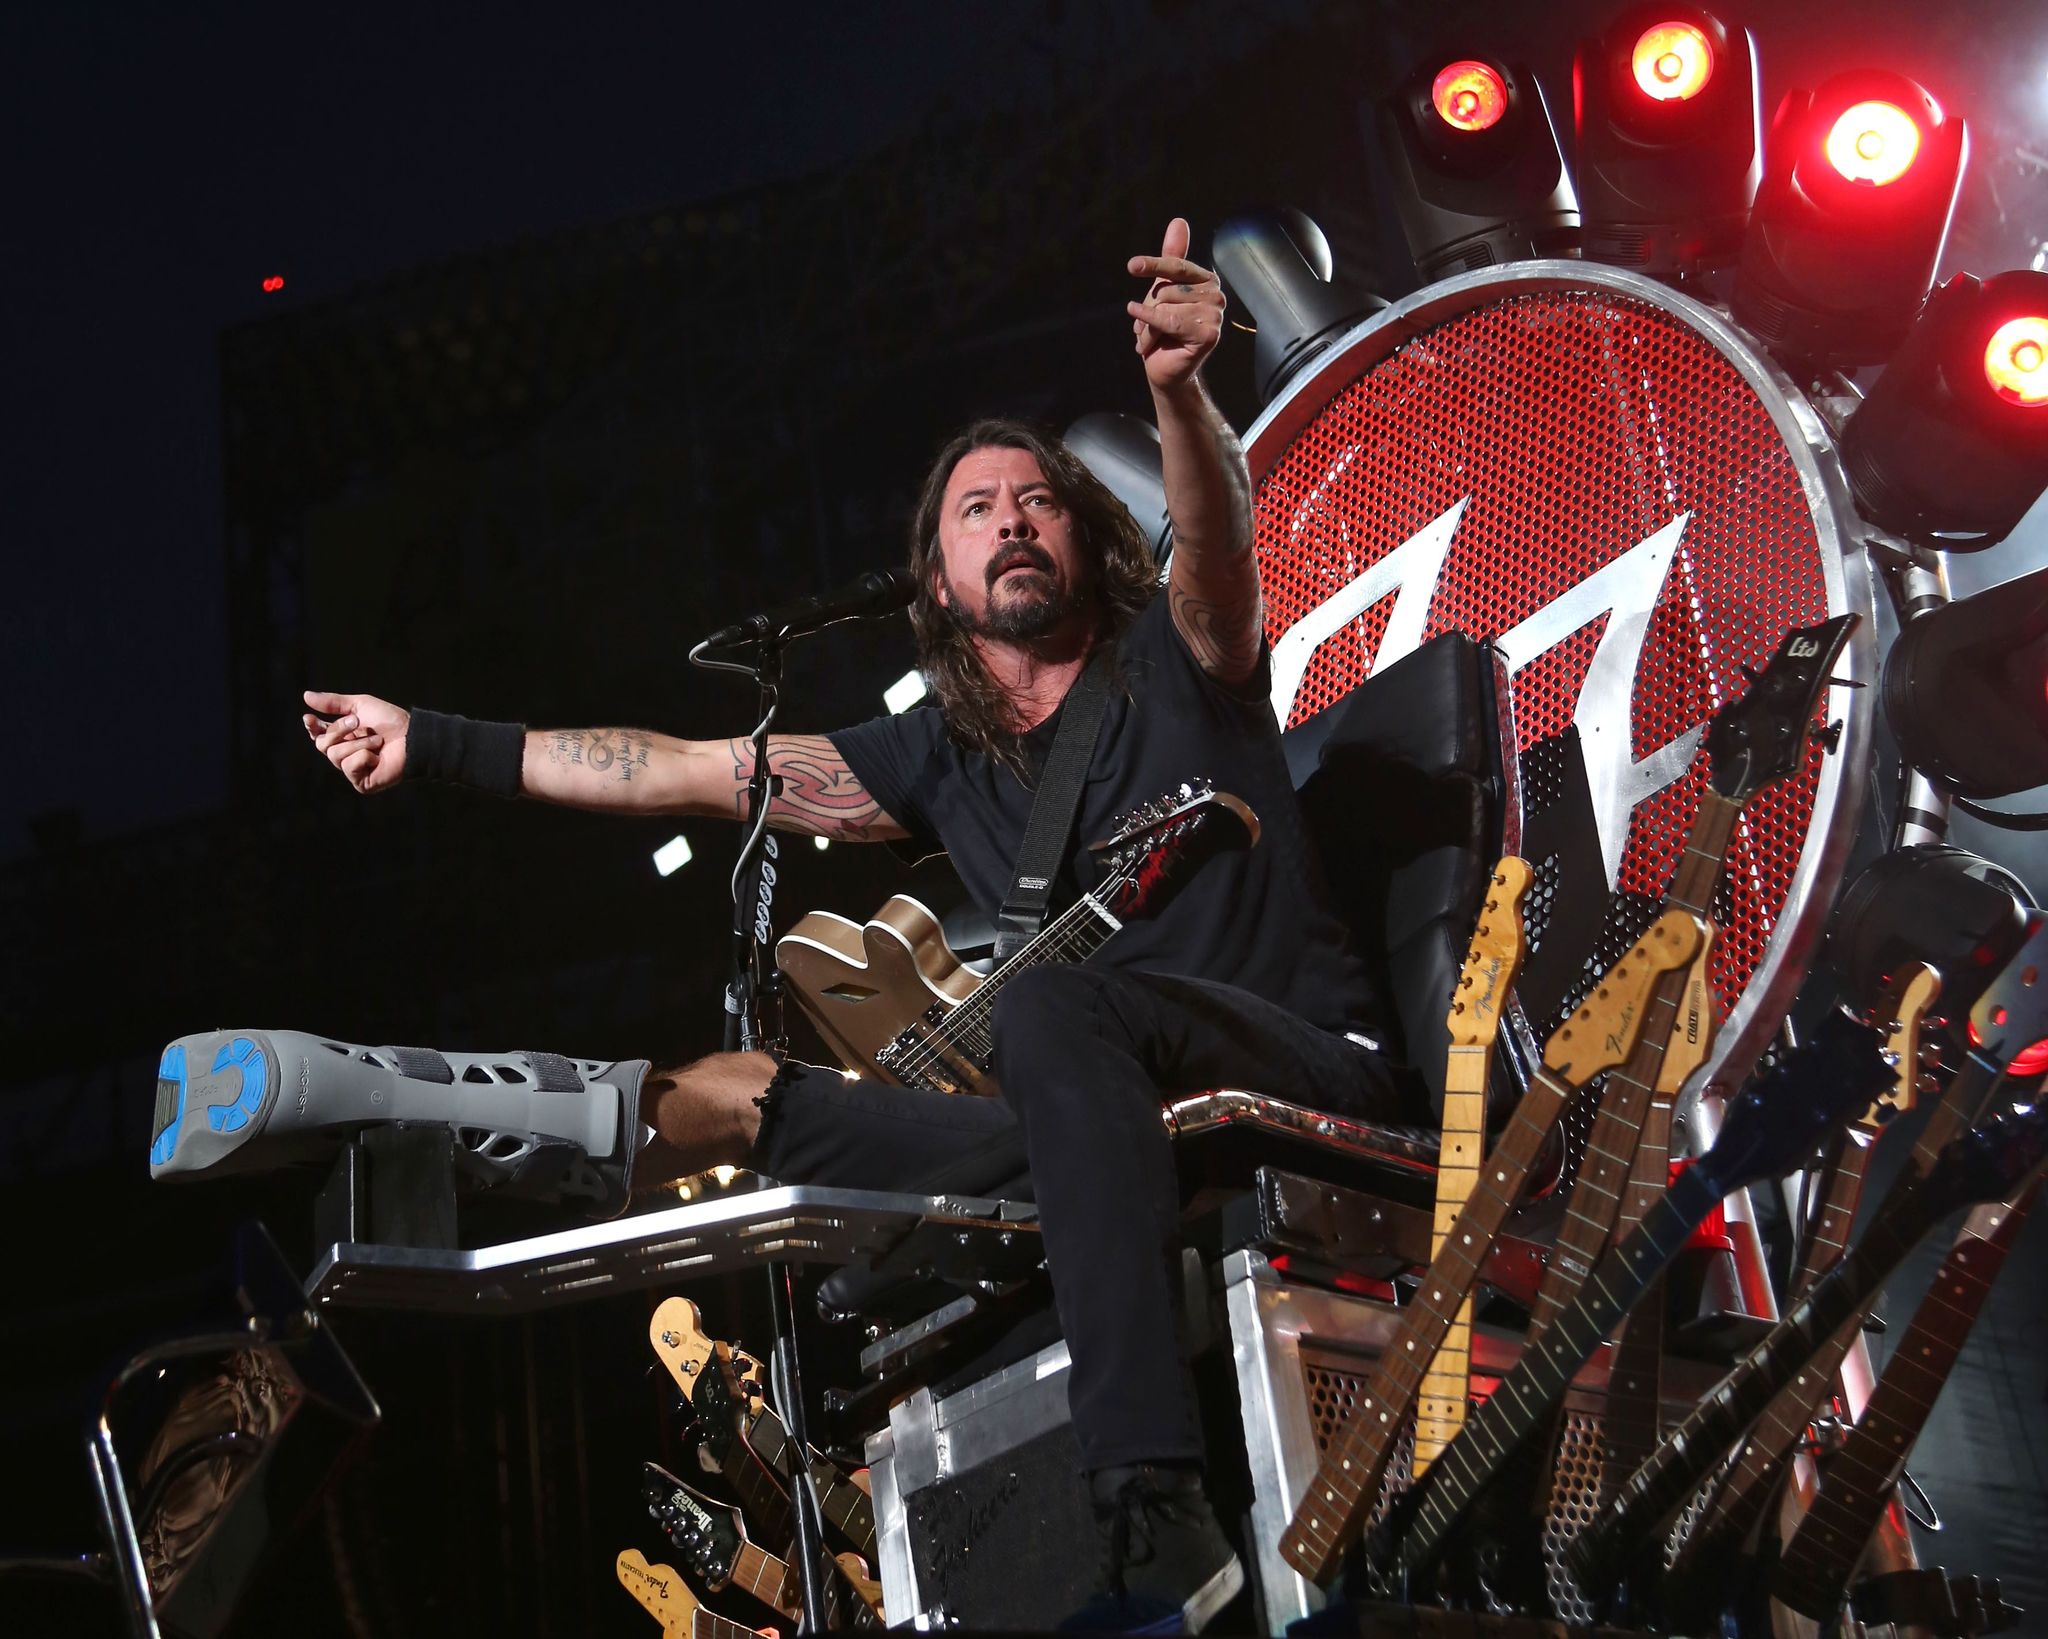 Dave Grohl of the Foo Fighters performs at Citi Field in New York on July 15. The band is suing insurers for failing to reimburse them for European shows they canceled following the Paris terrorist attacks in November.